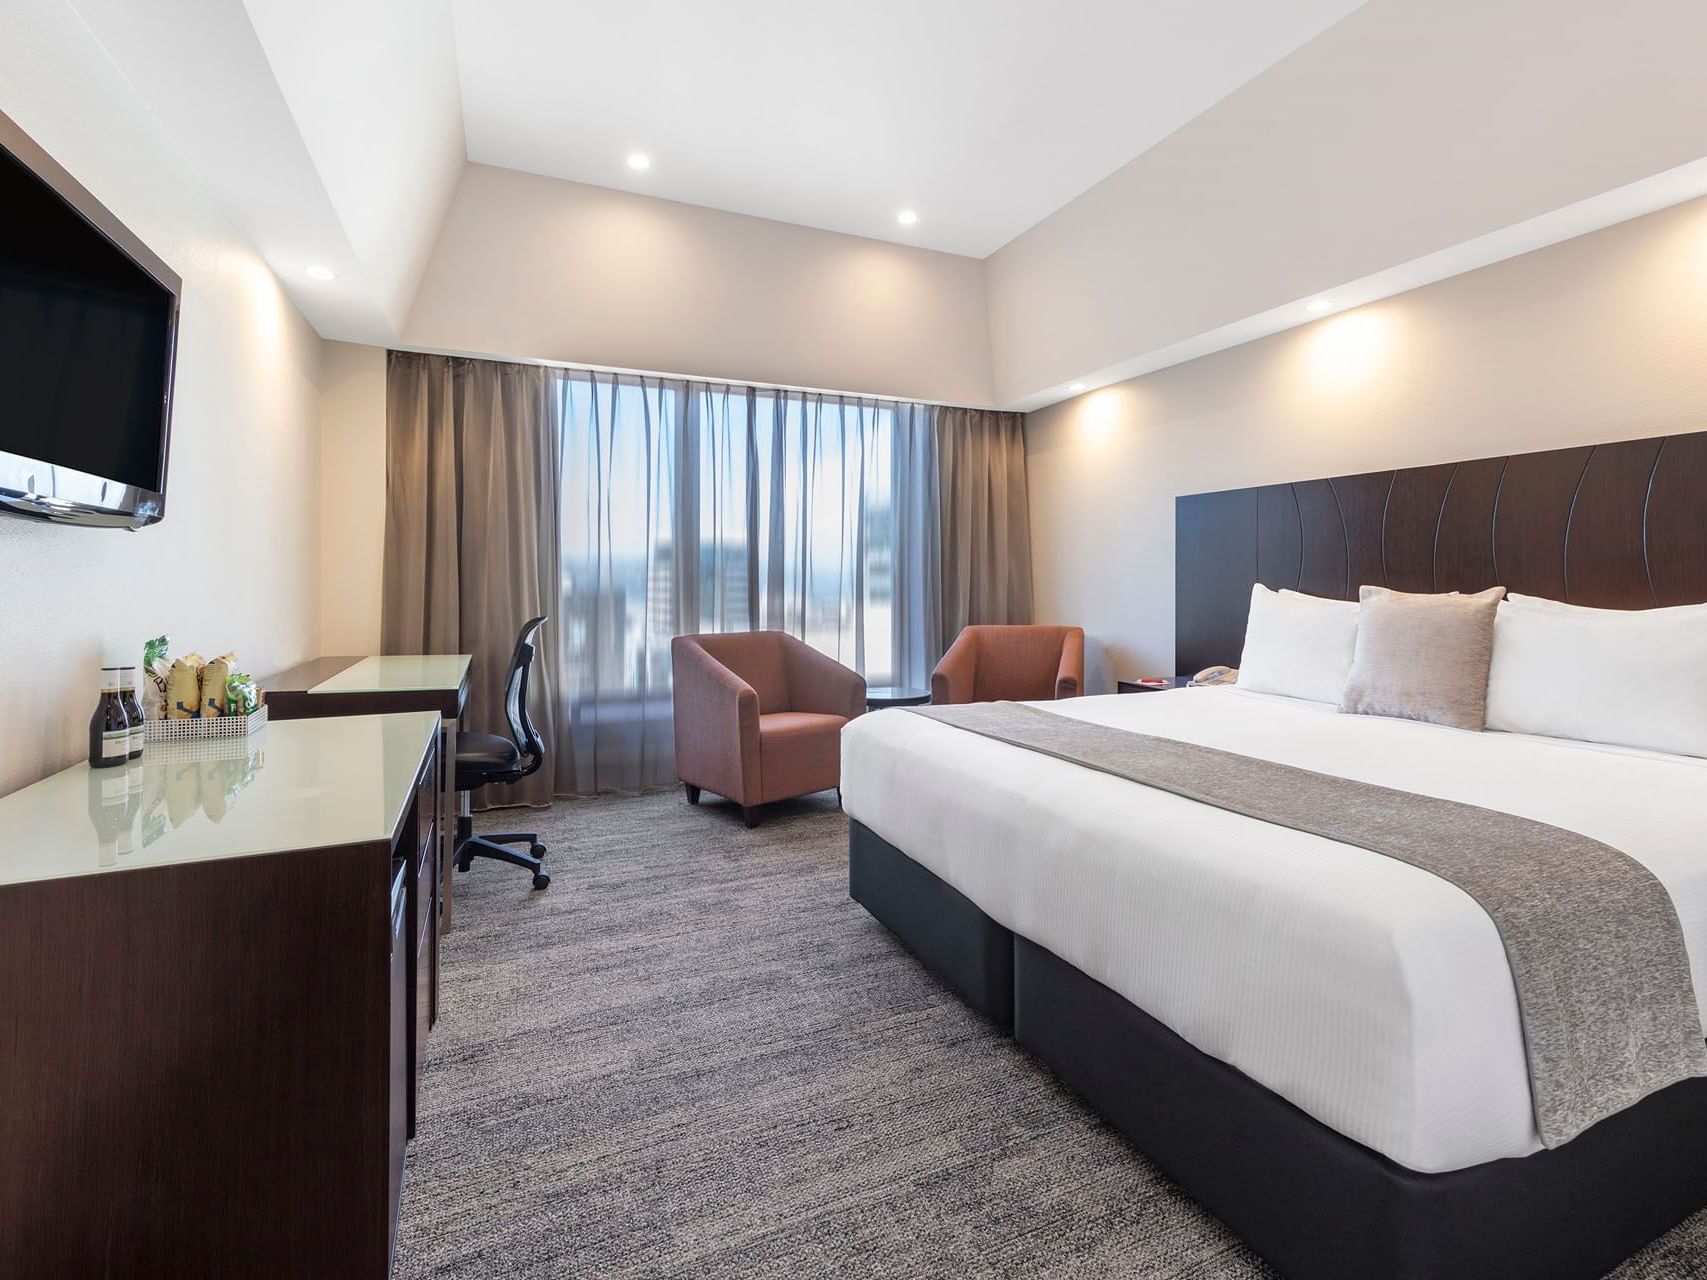 King bed, working desk, TV, and comfy chairs in Executive King at James Cook Hotel Grand Chancellor